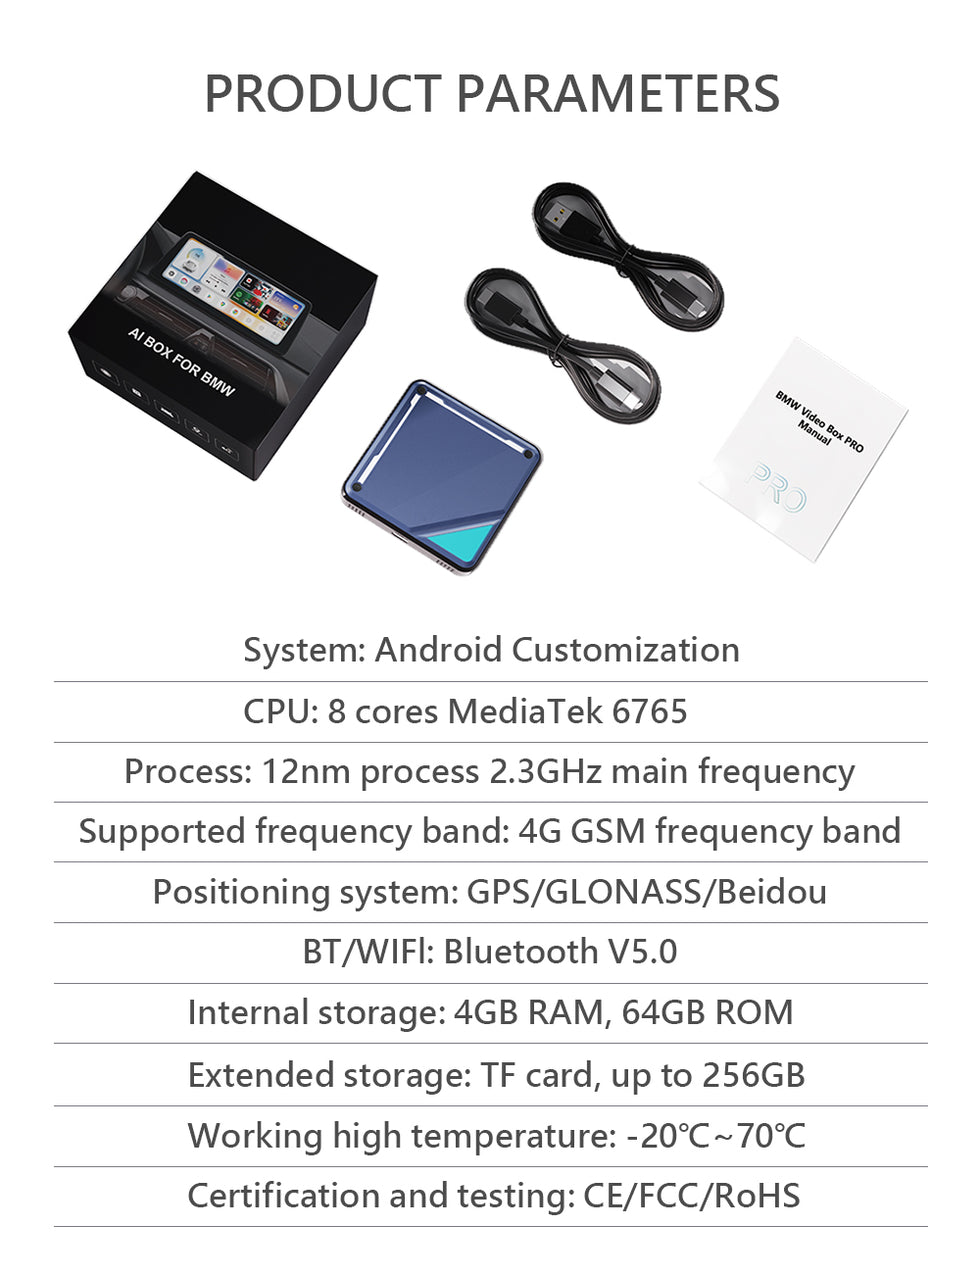 Specifications and package contents of the Linkifun BMW Carplay Android AI Box